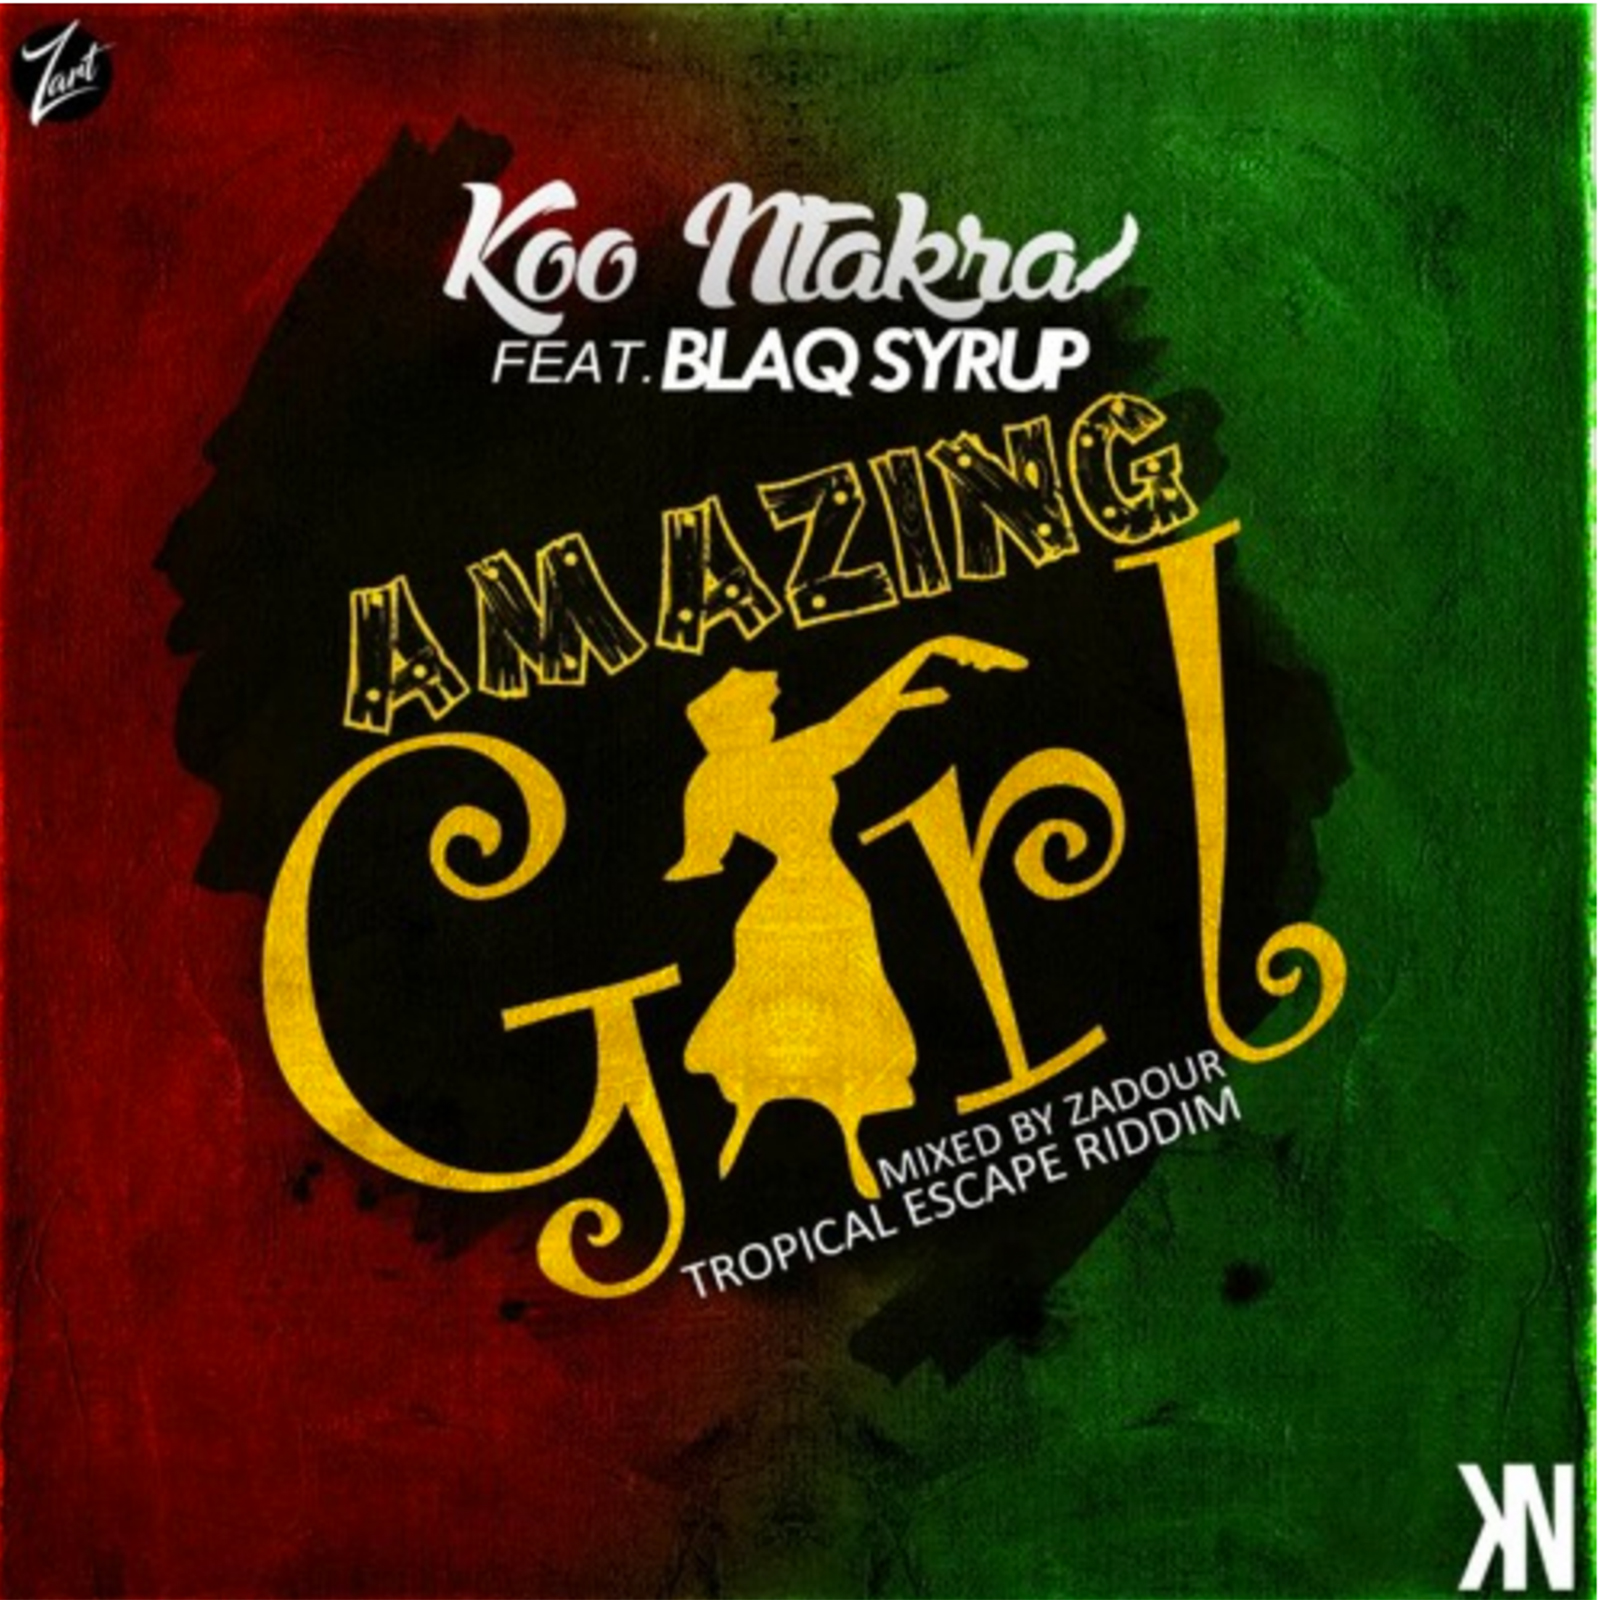 Amazing Girl (Tropical Escape Riddim) by Koo Ntakra feat. Blaq Syrup